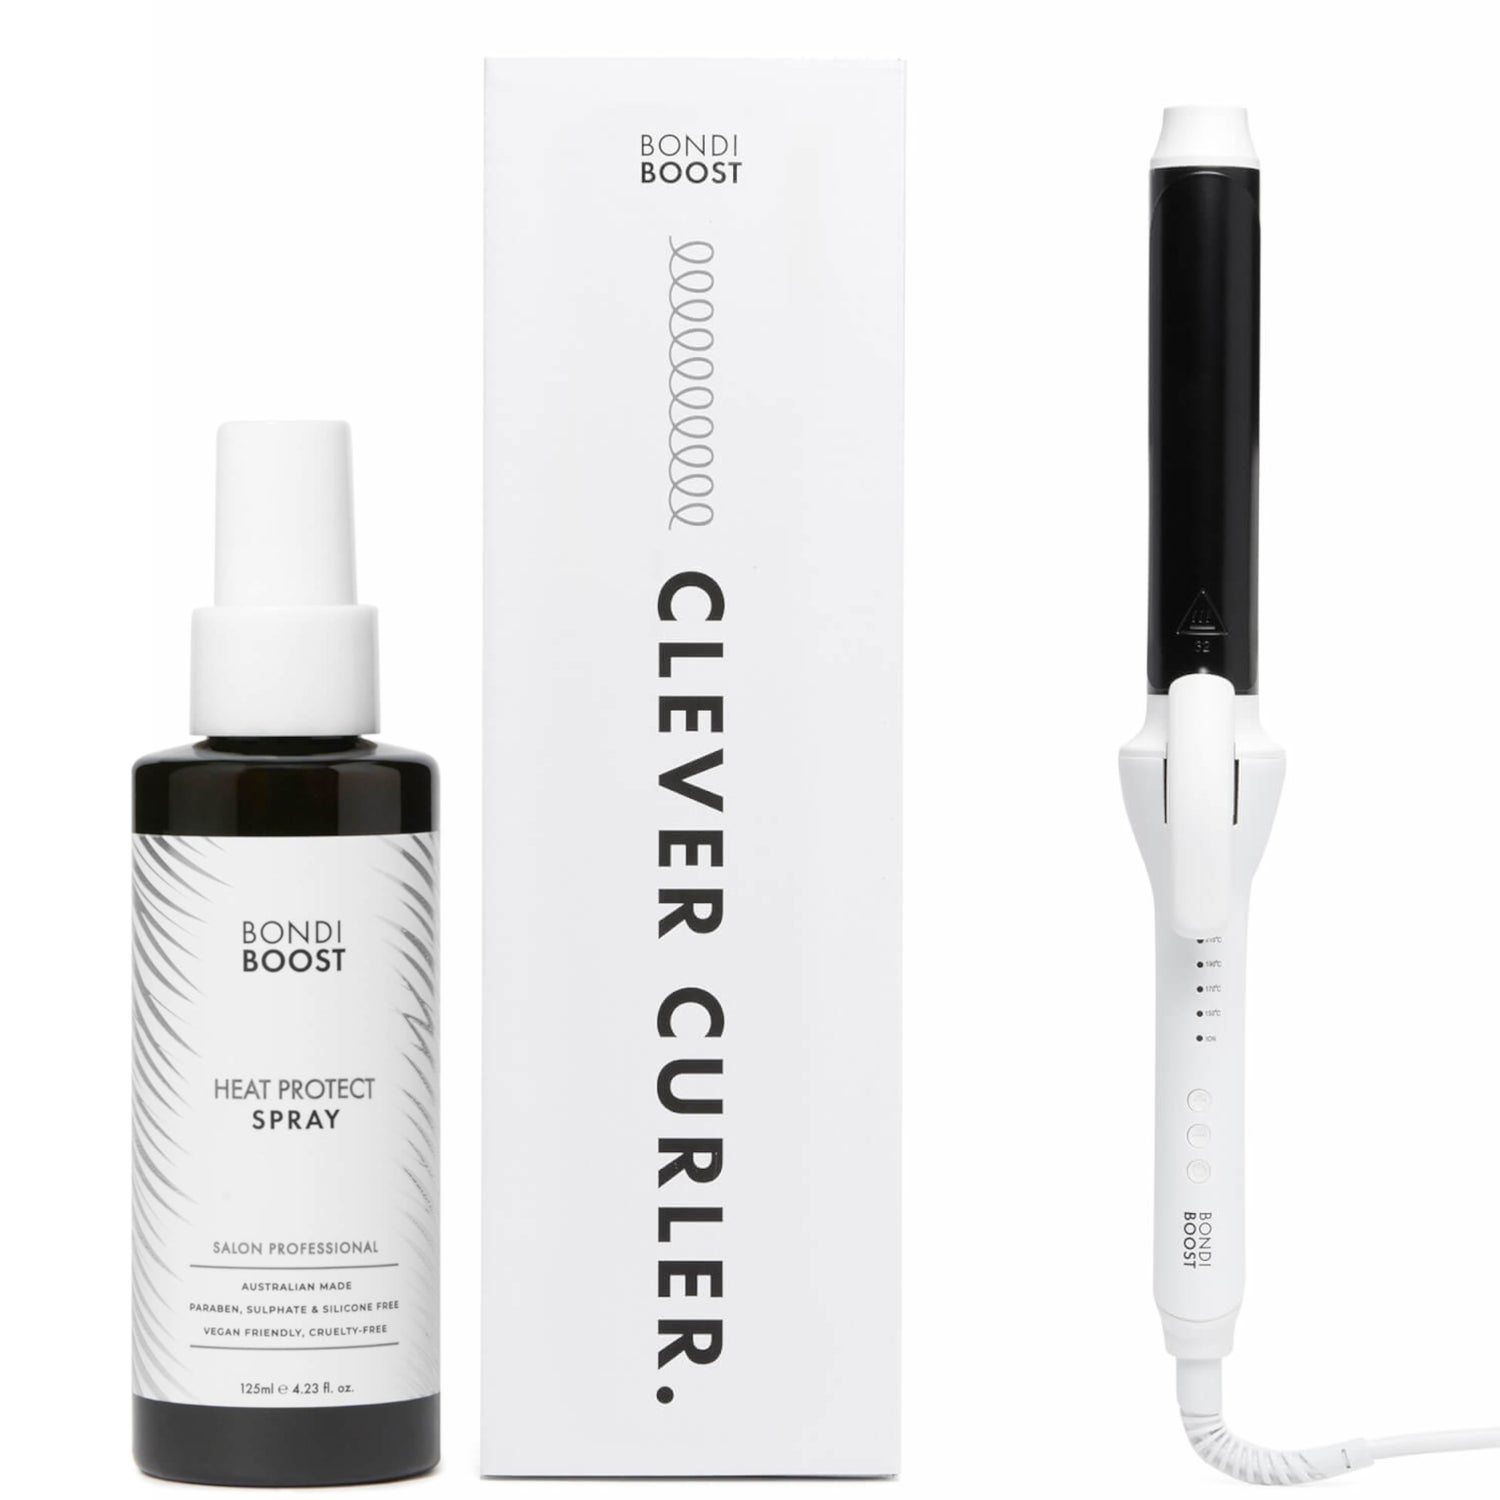 BondiBoost Clever Curler and Heat Protect Spray 125ml Bundle